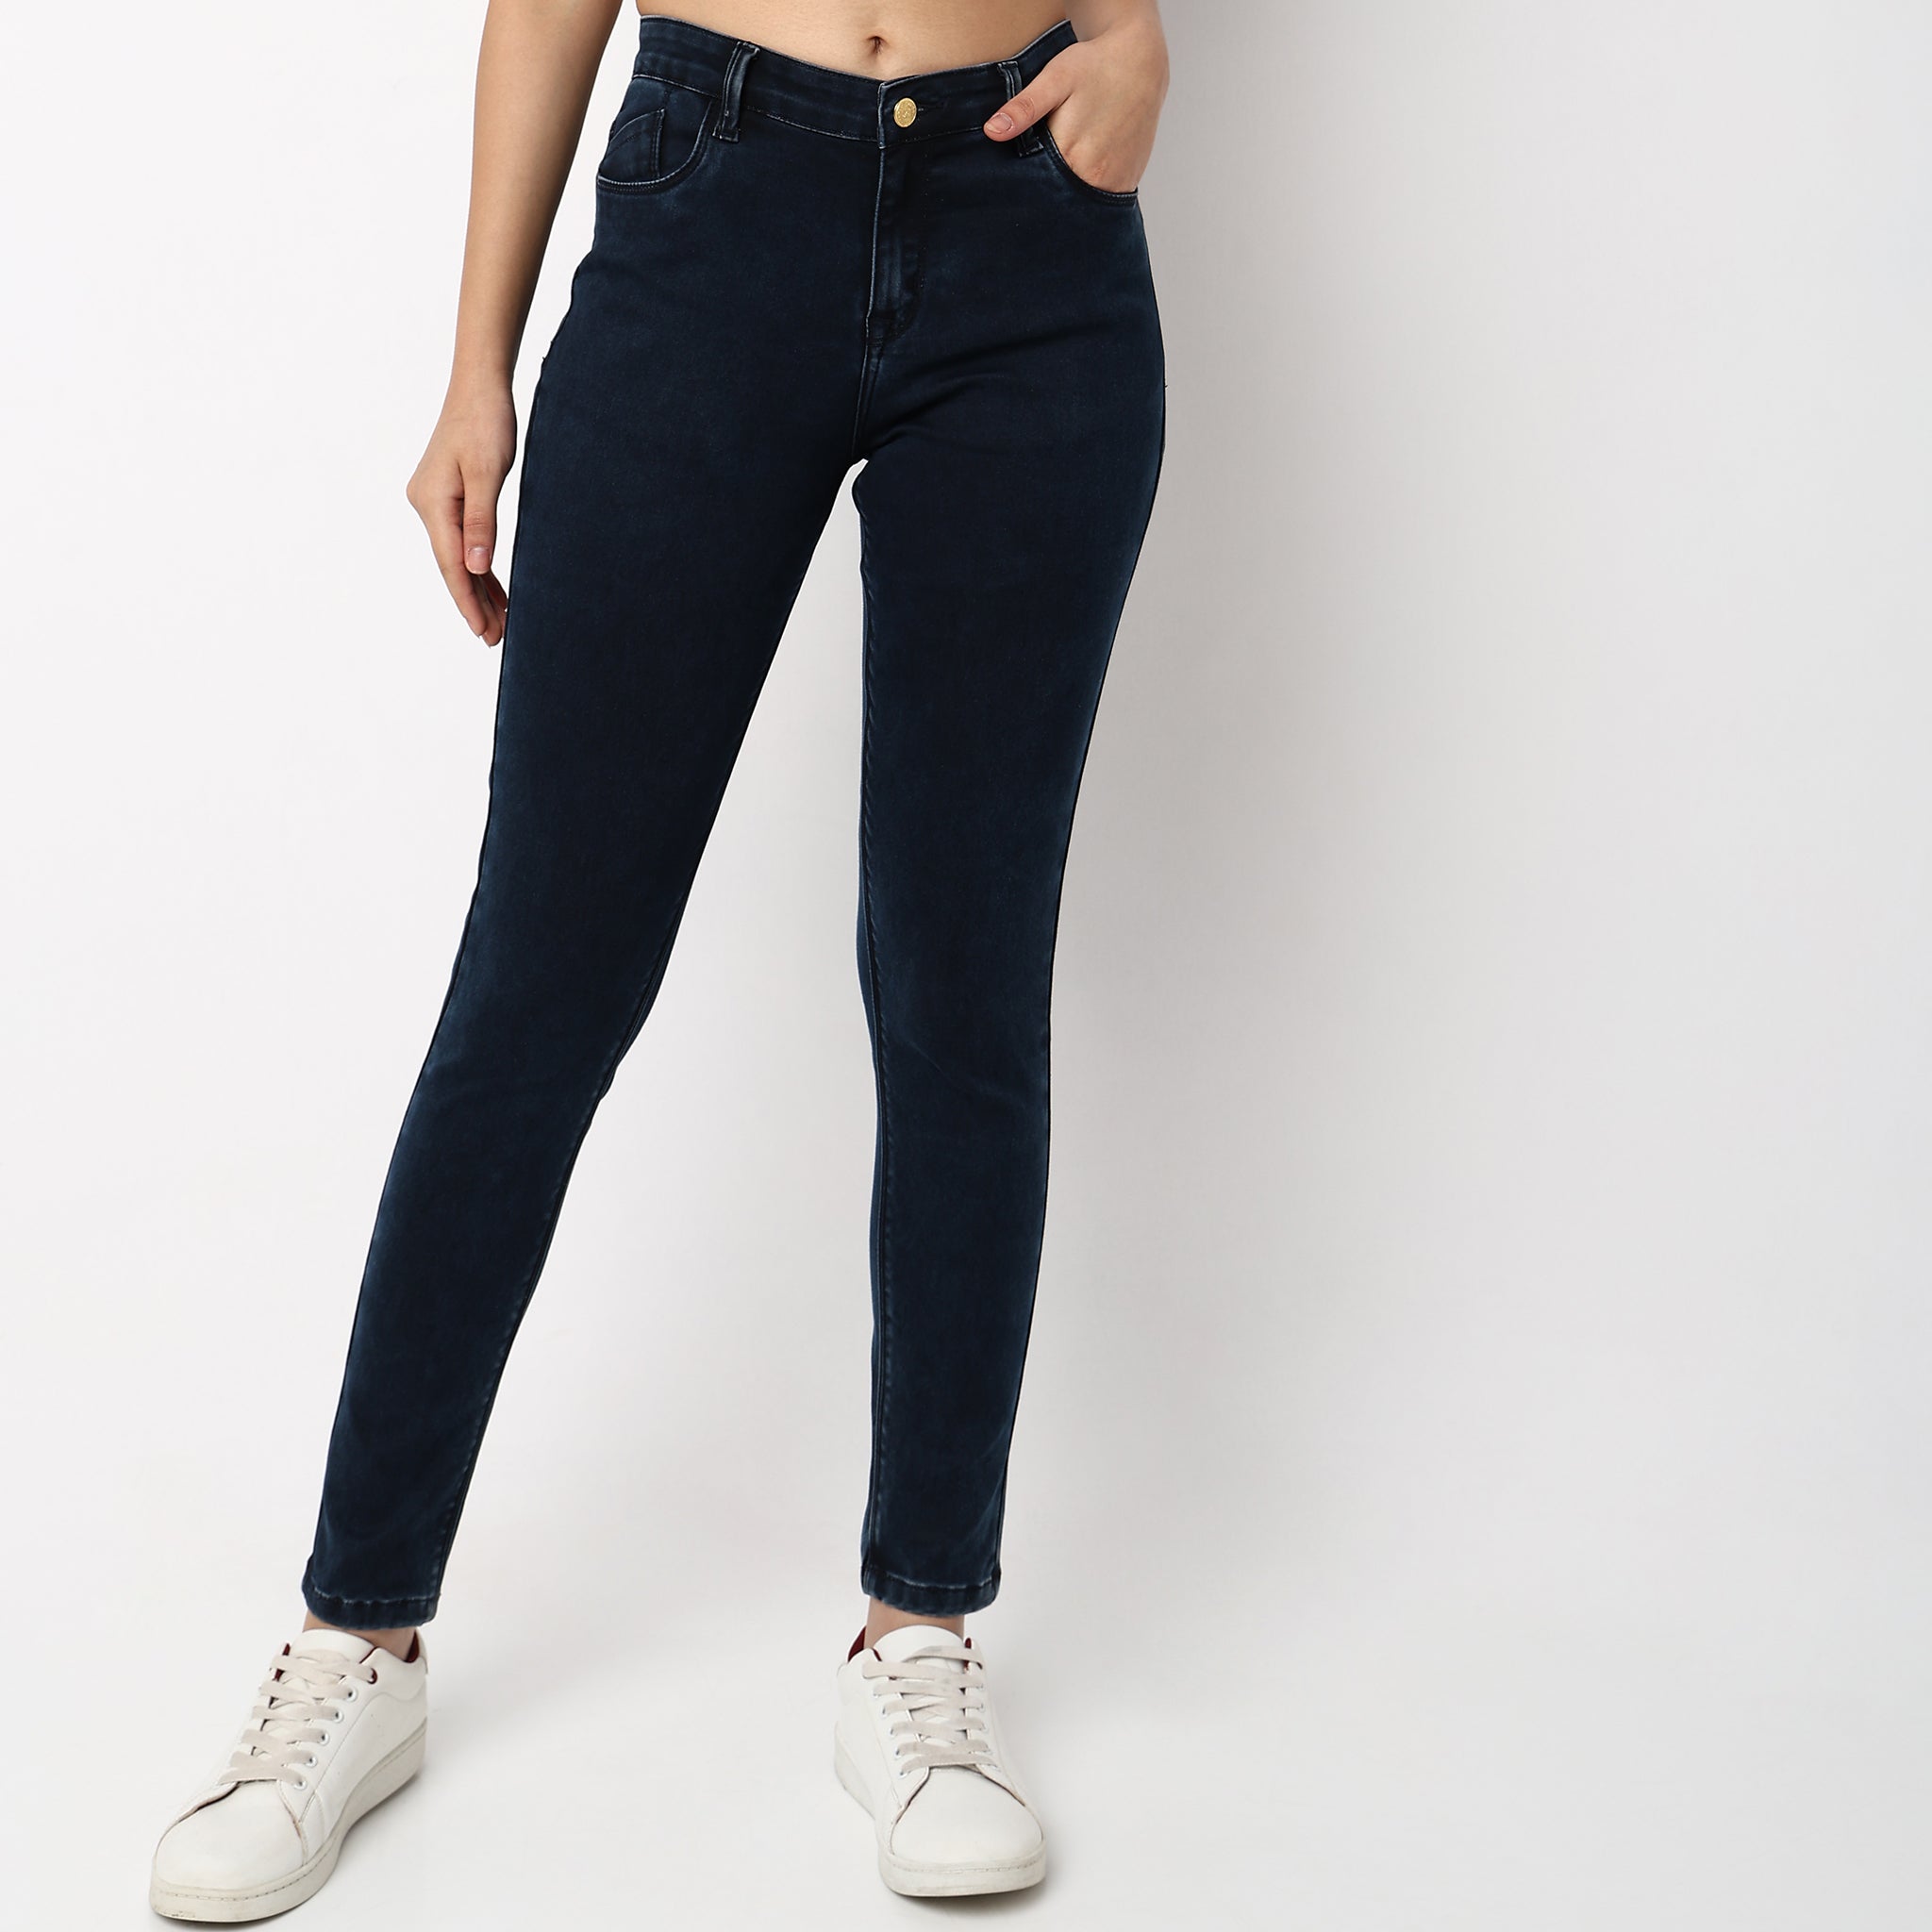 Buy Skinny Fit Solid Jeggings - Style Union